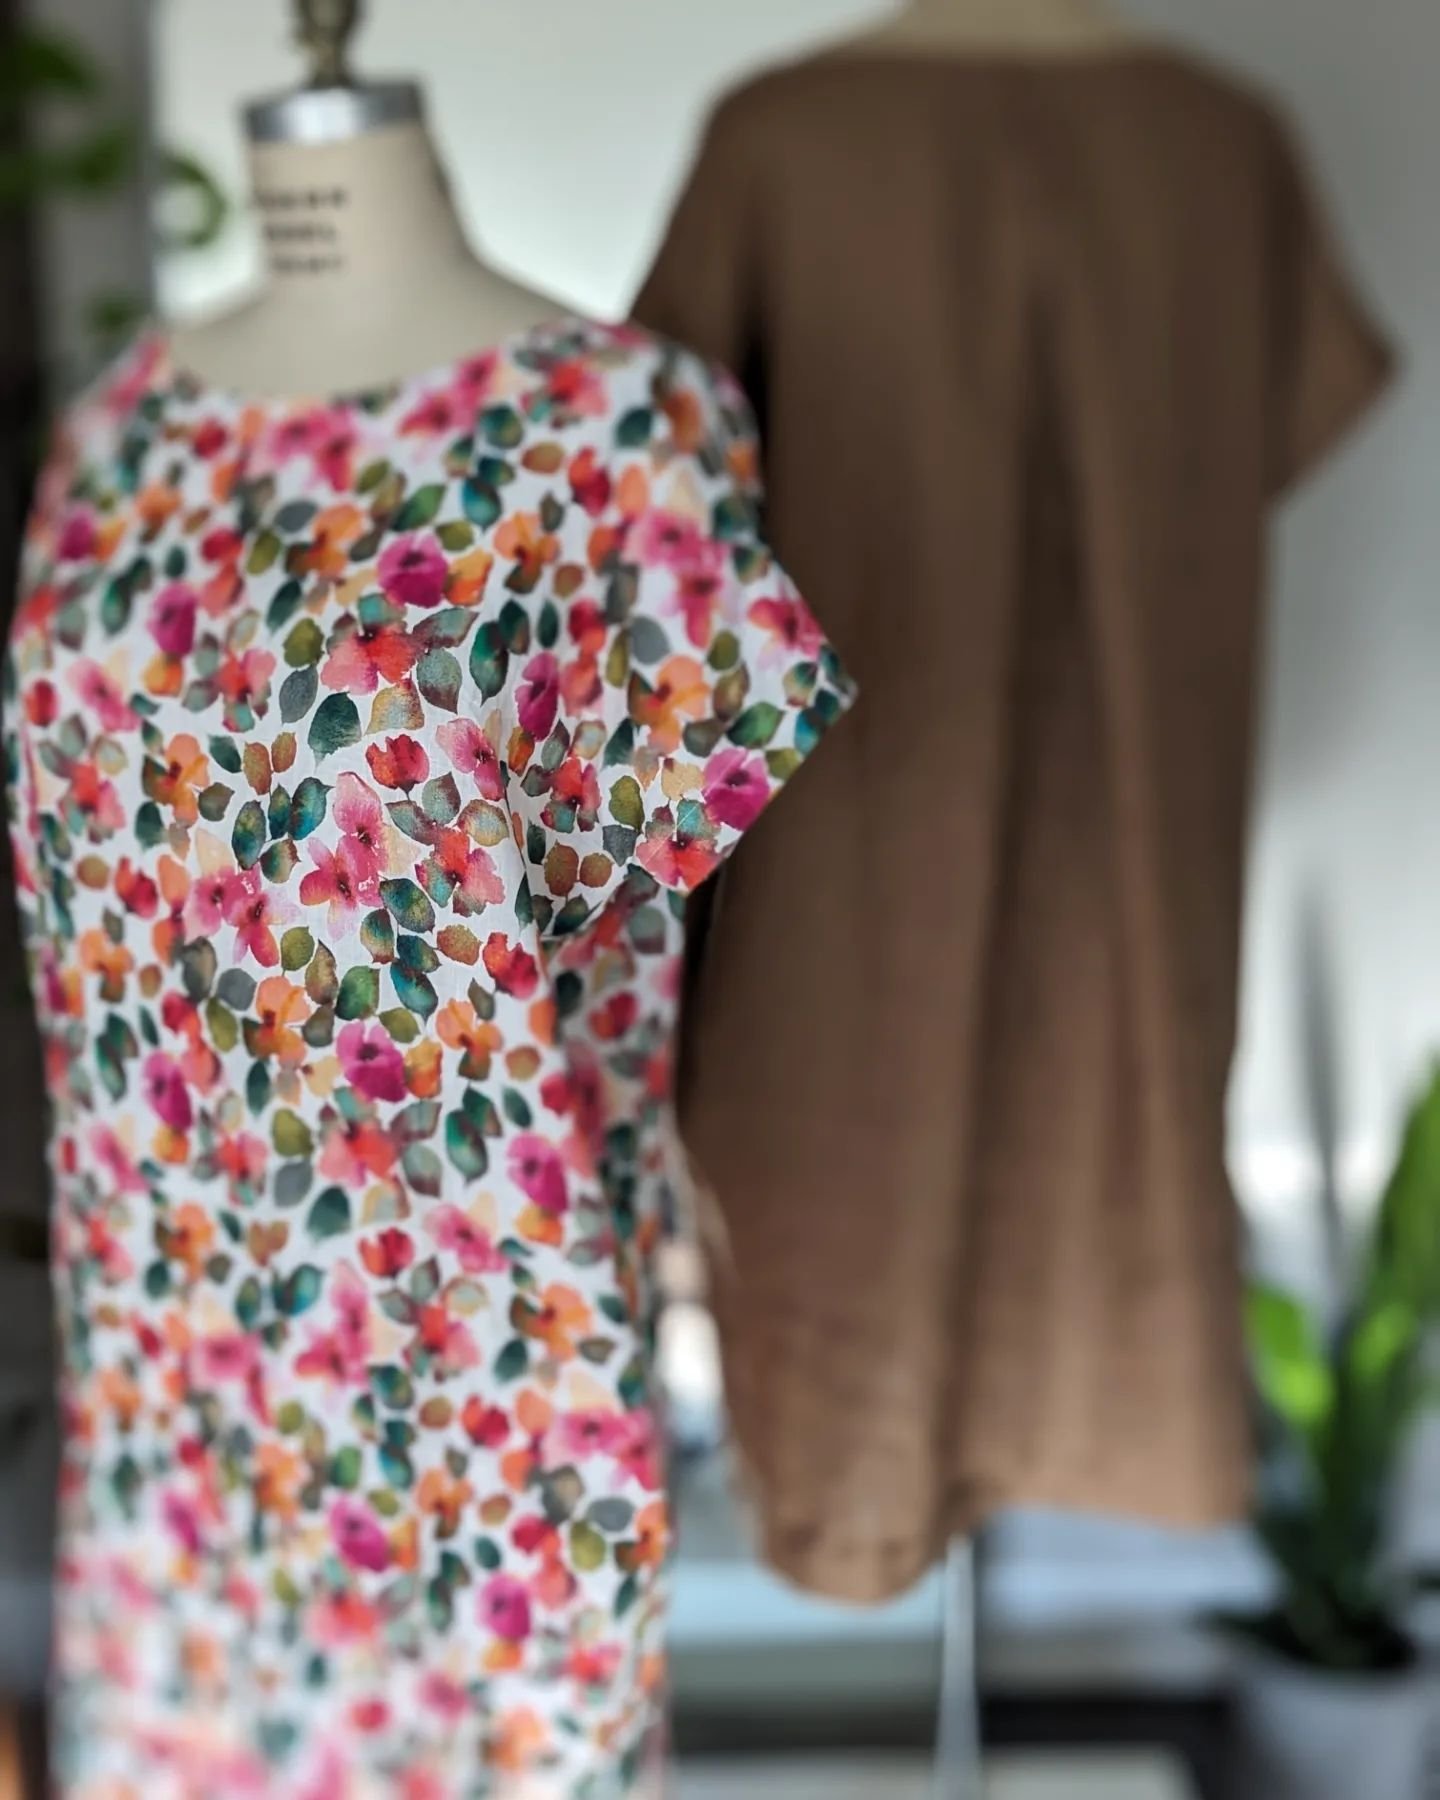 Summer wardrobe refresh.
.
These easy to wear linen dresses are the perfect addition to any summer wardrobe. Throw 'em on with a great pair of earrings and sandals and you've got a polished look, while keeping it easy breezy 🍃 
.
The most stunning p